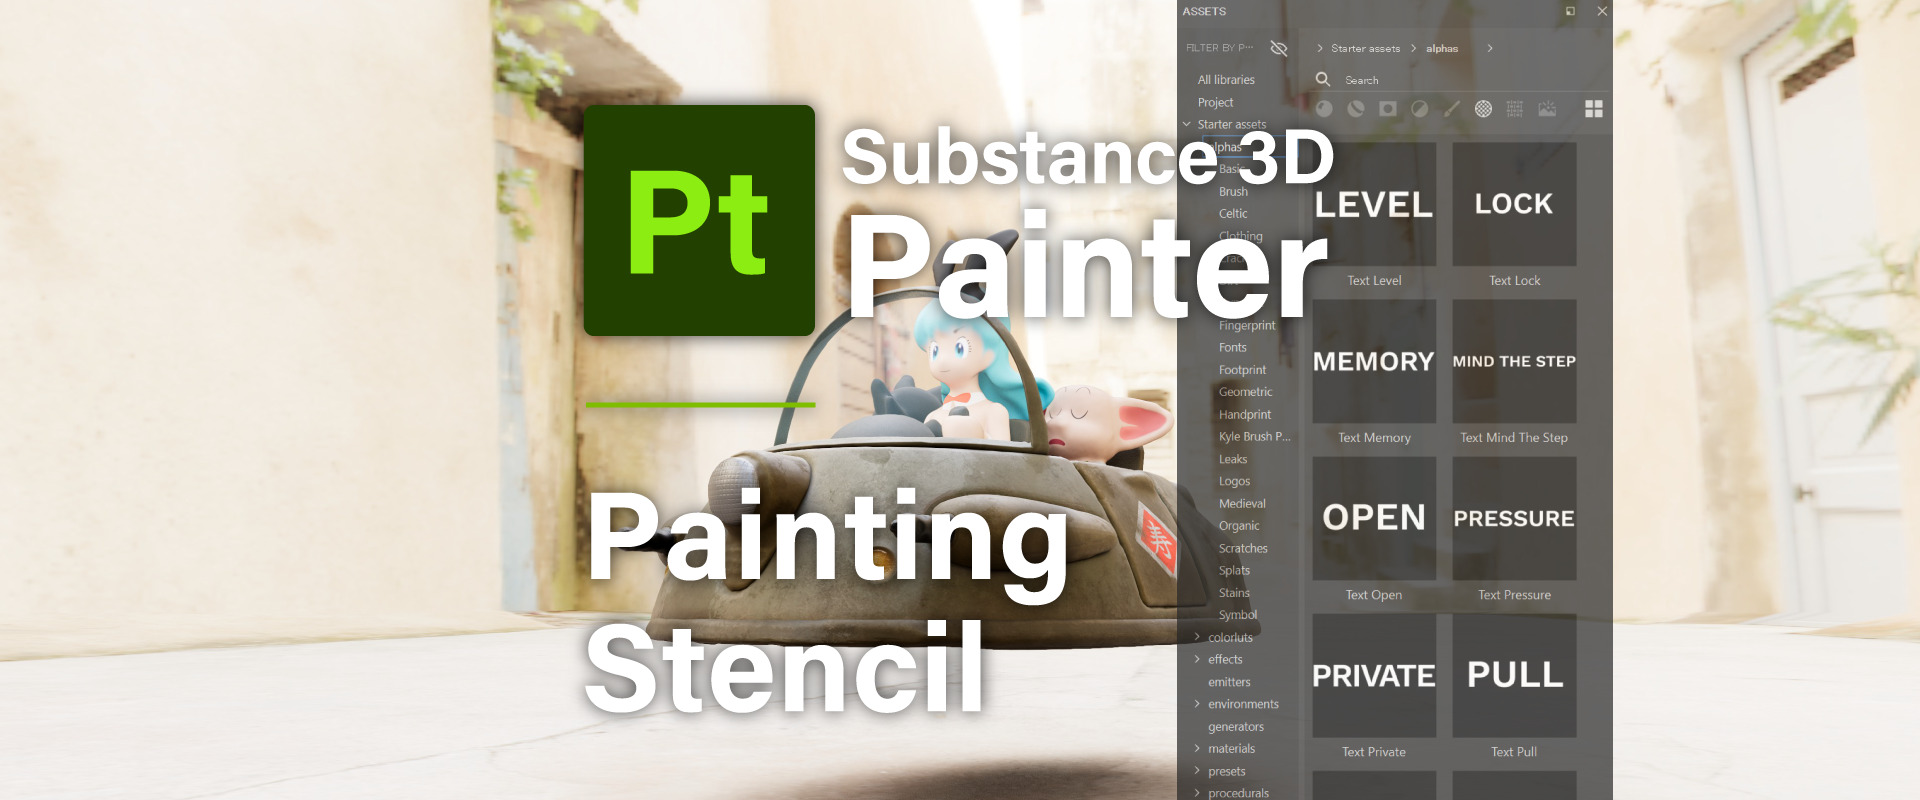 [ Substance 3D Painter ] How to use the stencil